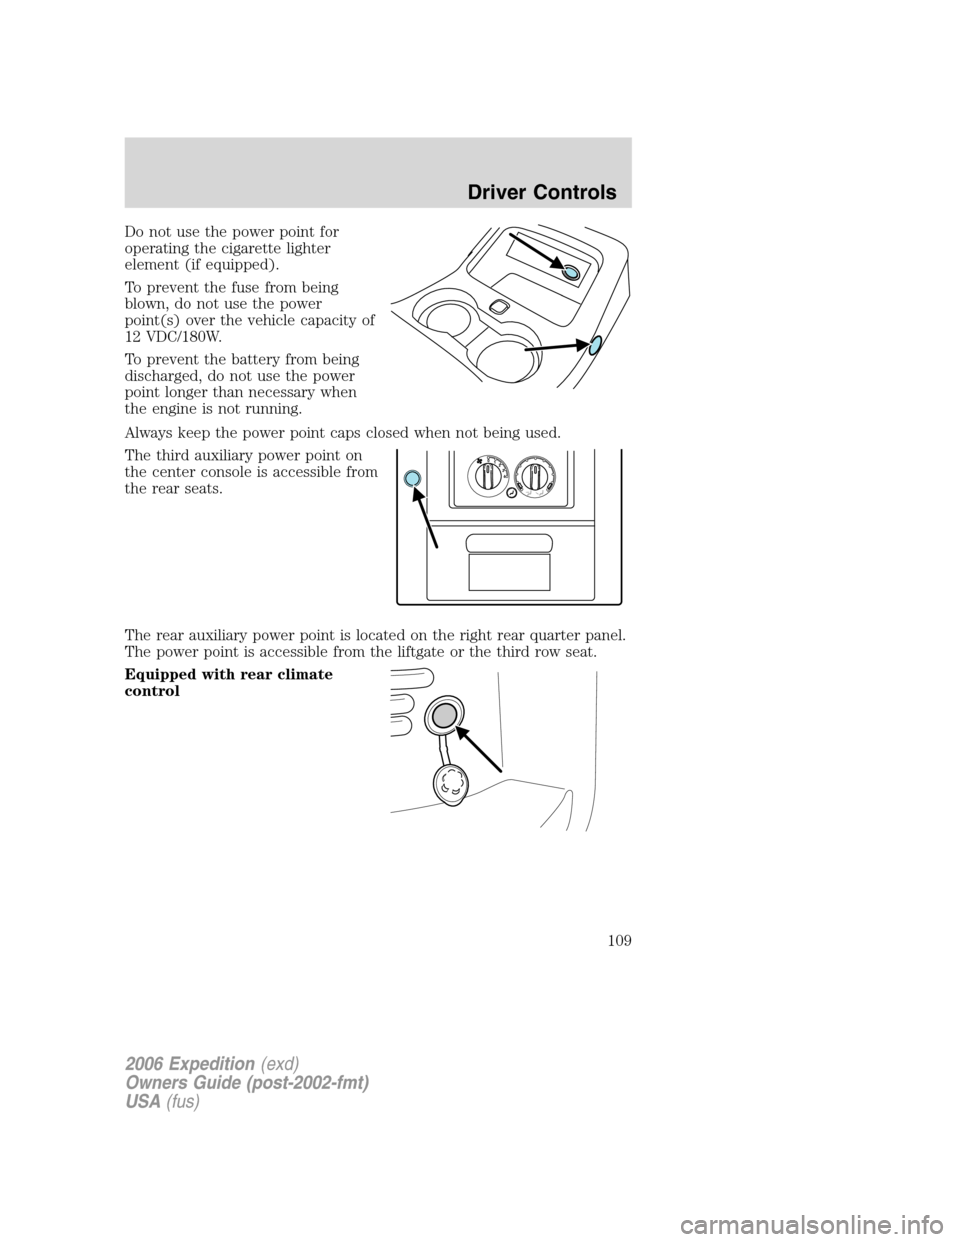 FORD EXPEDITION 2006 2.G Owners Manual Do not use the power point for
operating the cigarette lighter
element (if equipped).
To prevent the fuse from being
blown, do not use the power
point(s) over the vehicle capacity of
12 VDC/180W.
To p